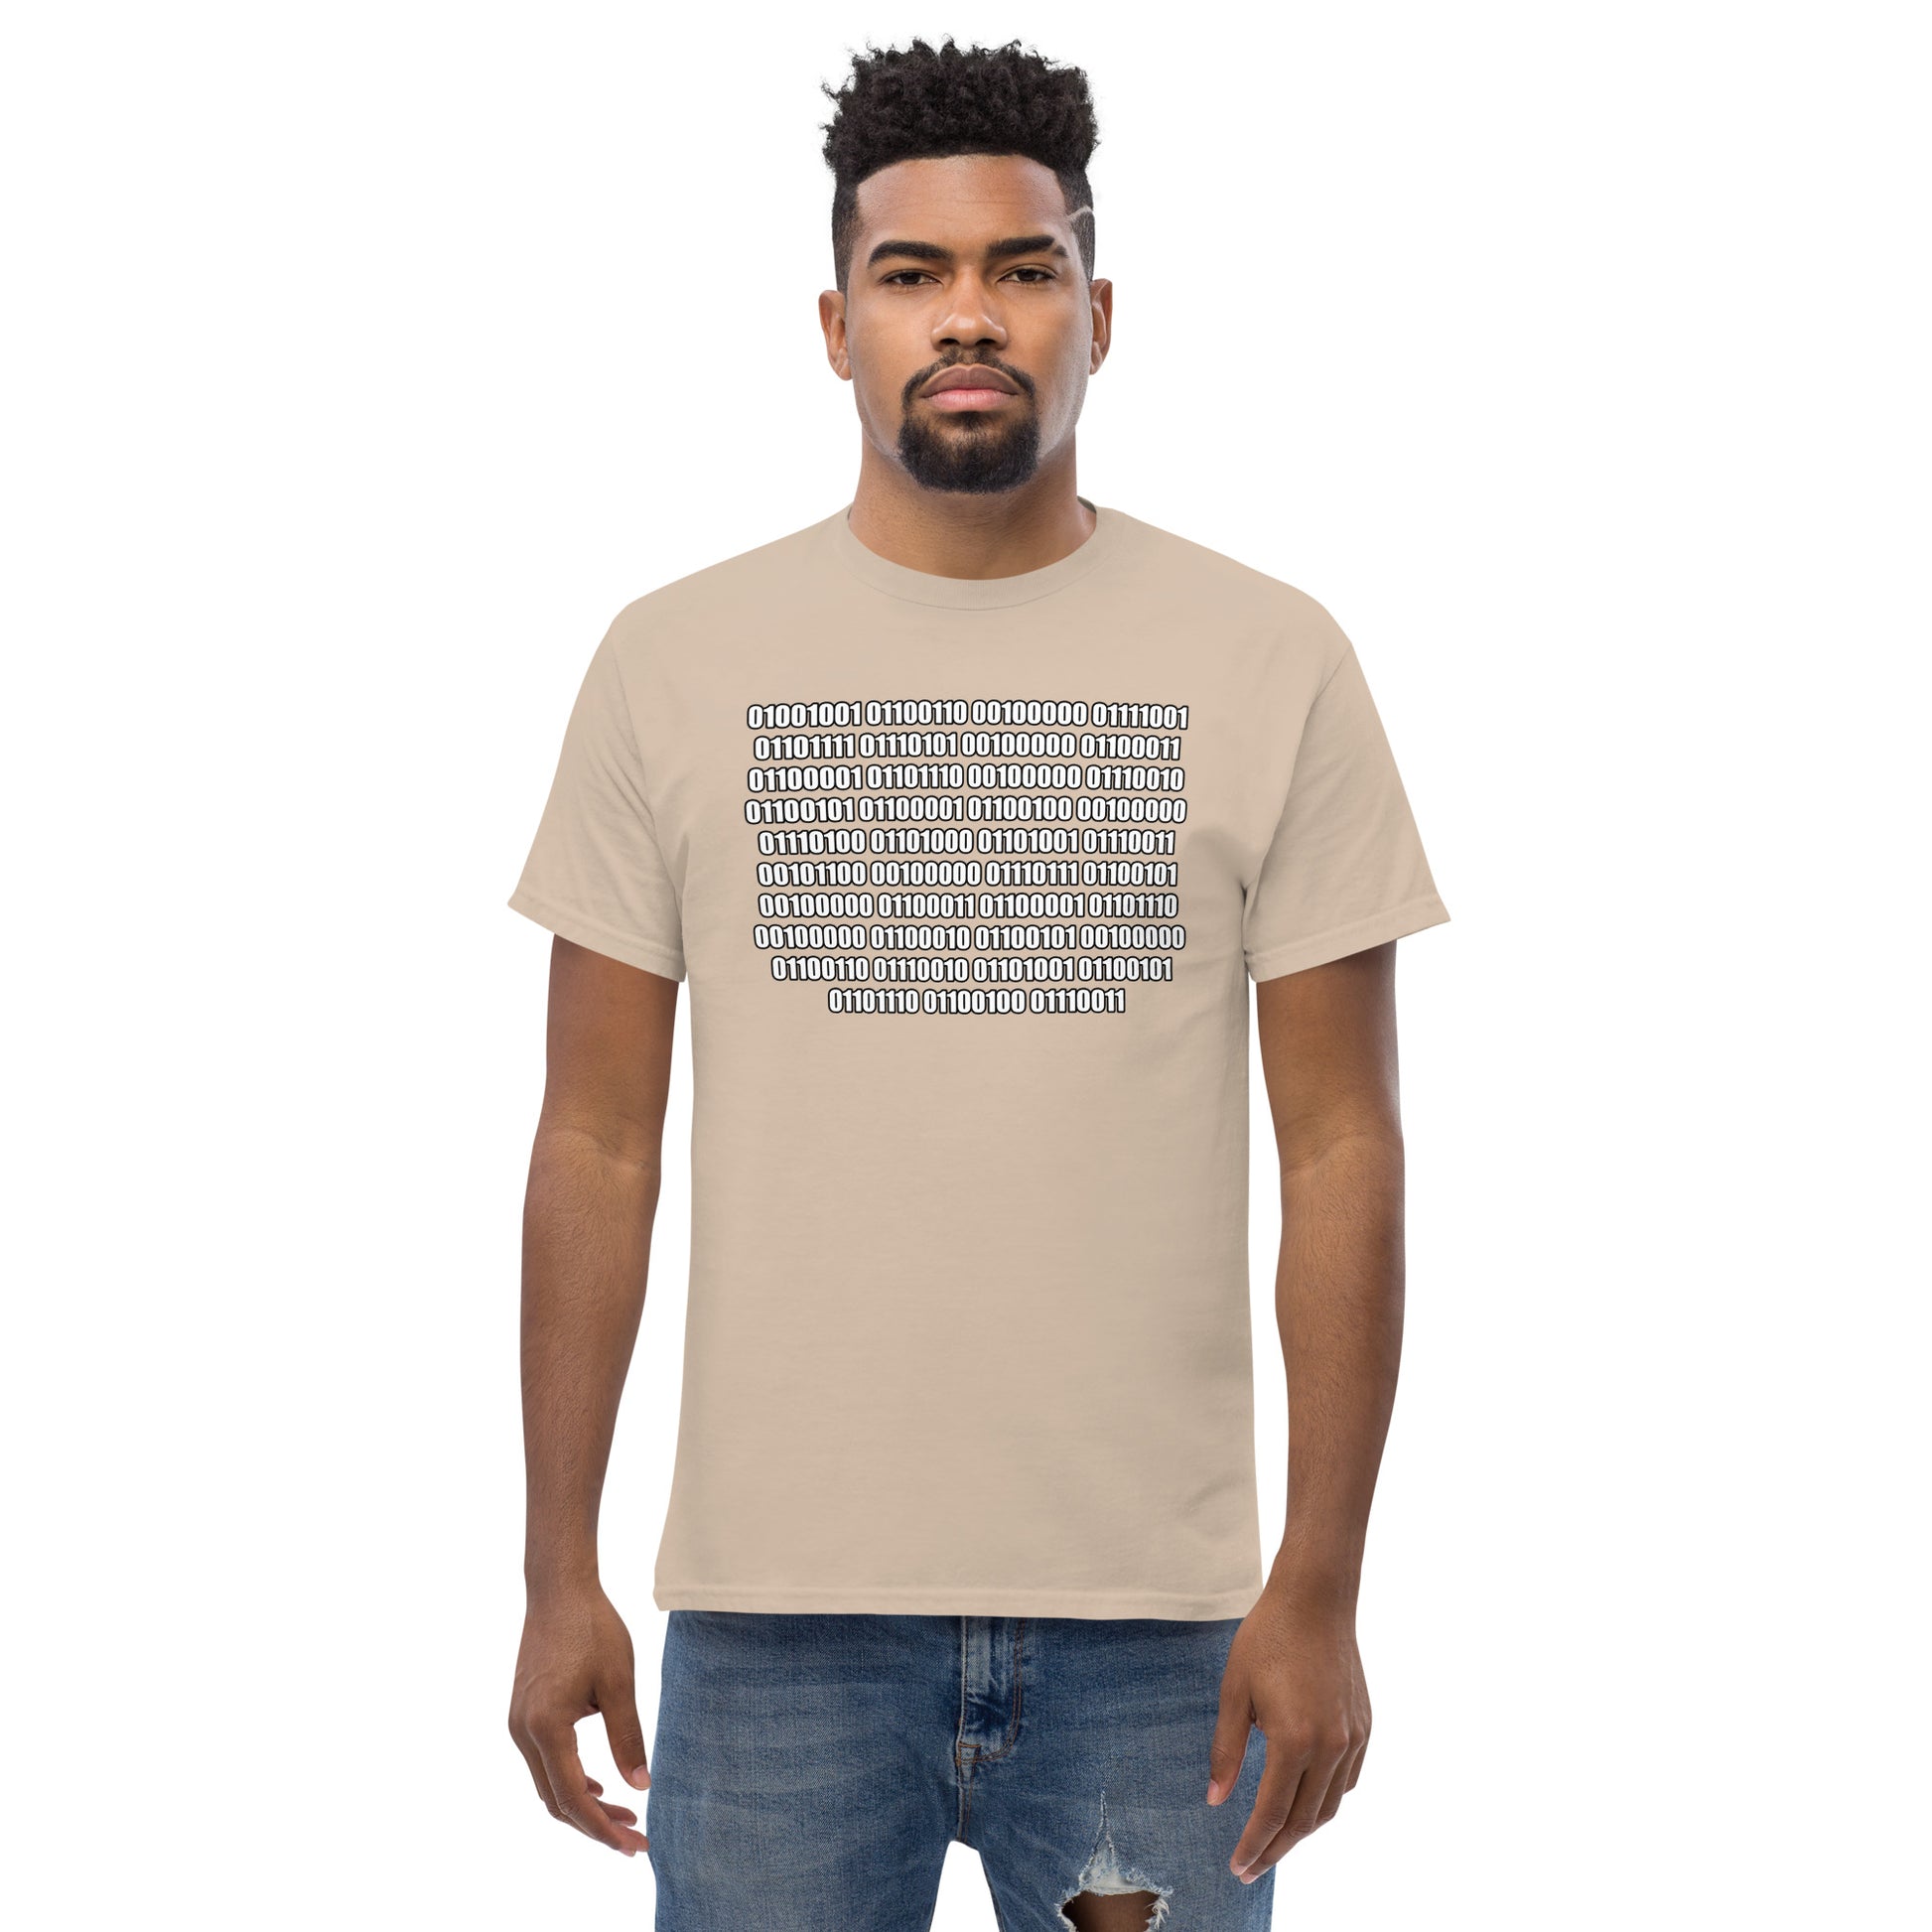 Men with sand t-shirt with binaire text "If you can read this"